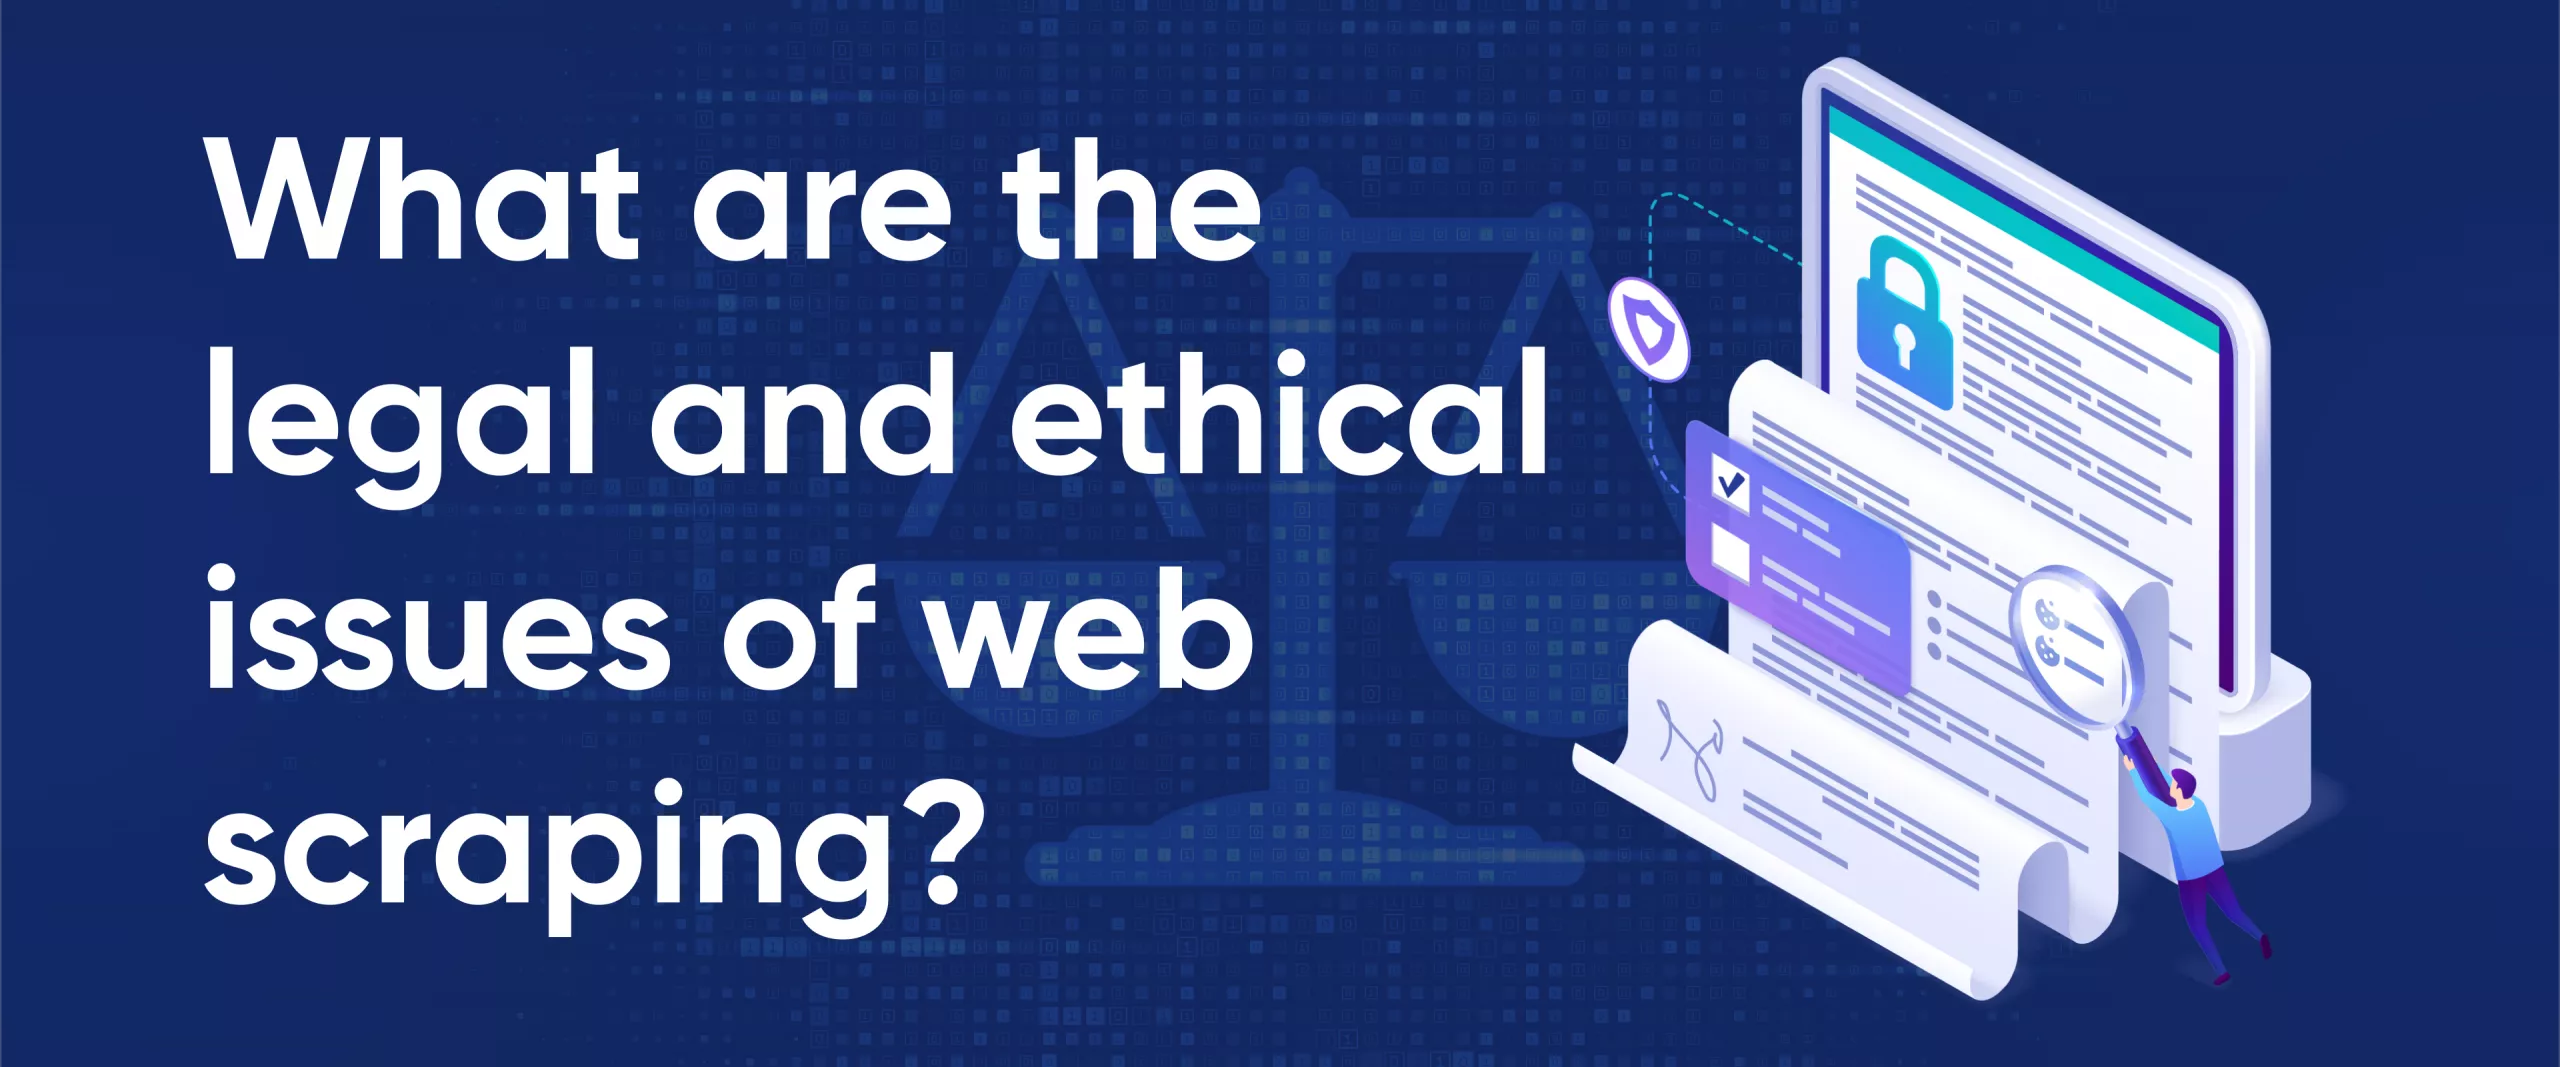 Is Web Scraping Legal? Breaking Down the Facts